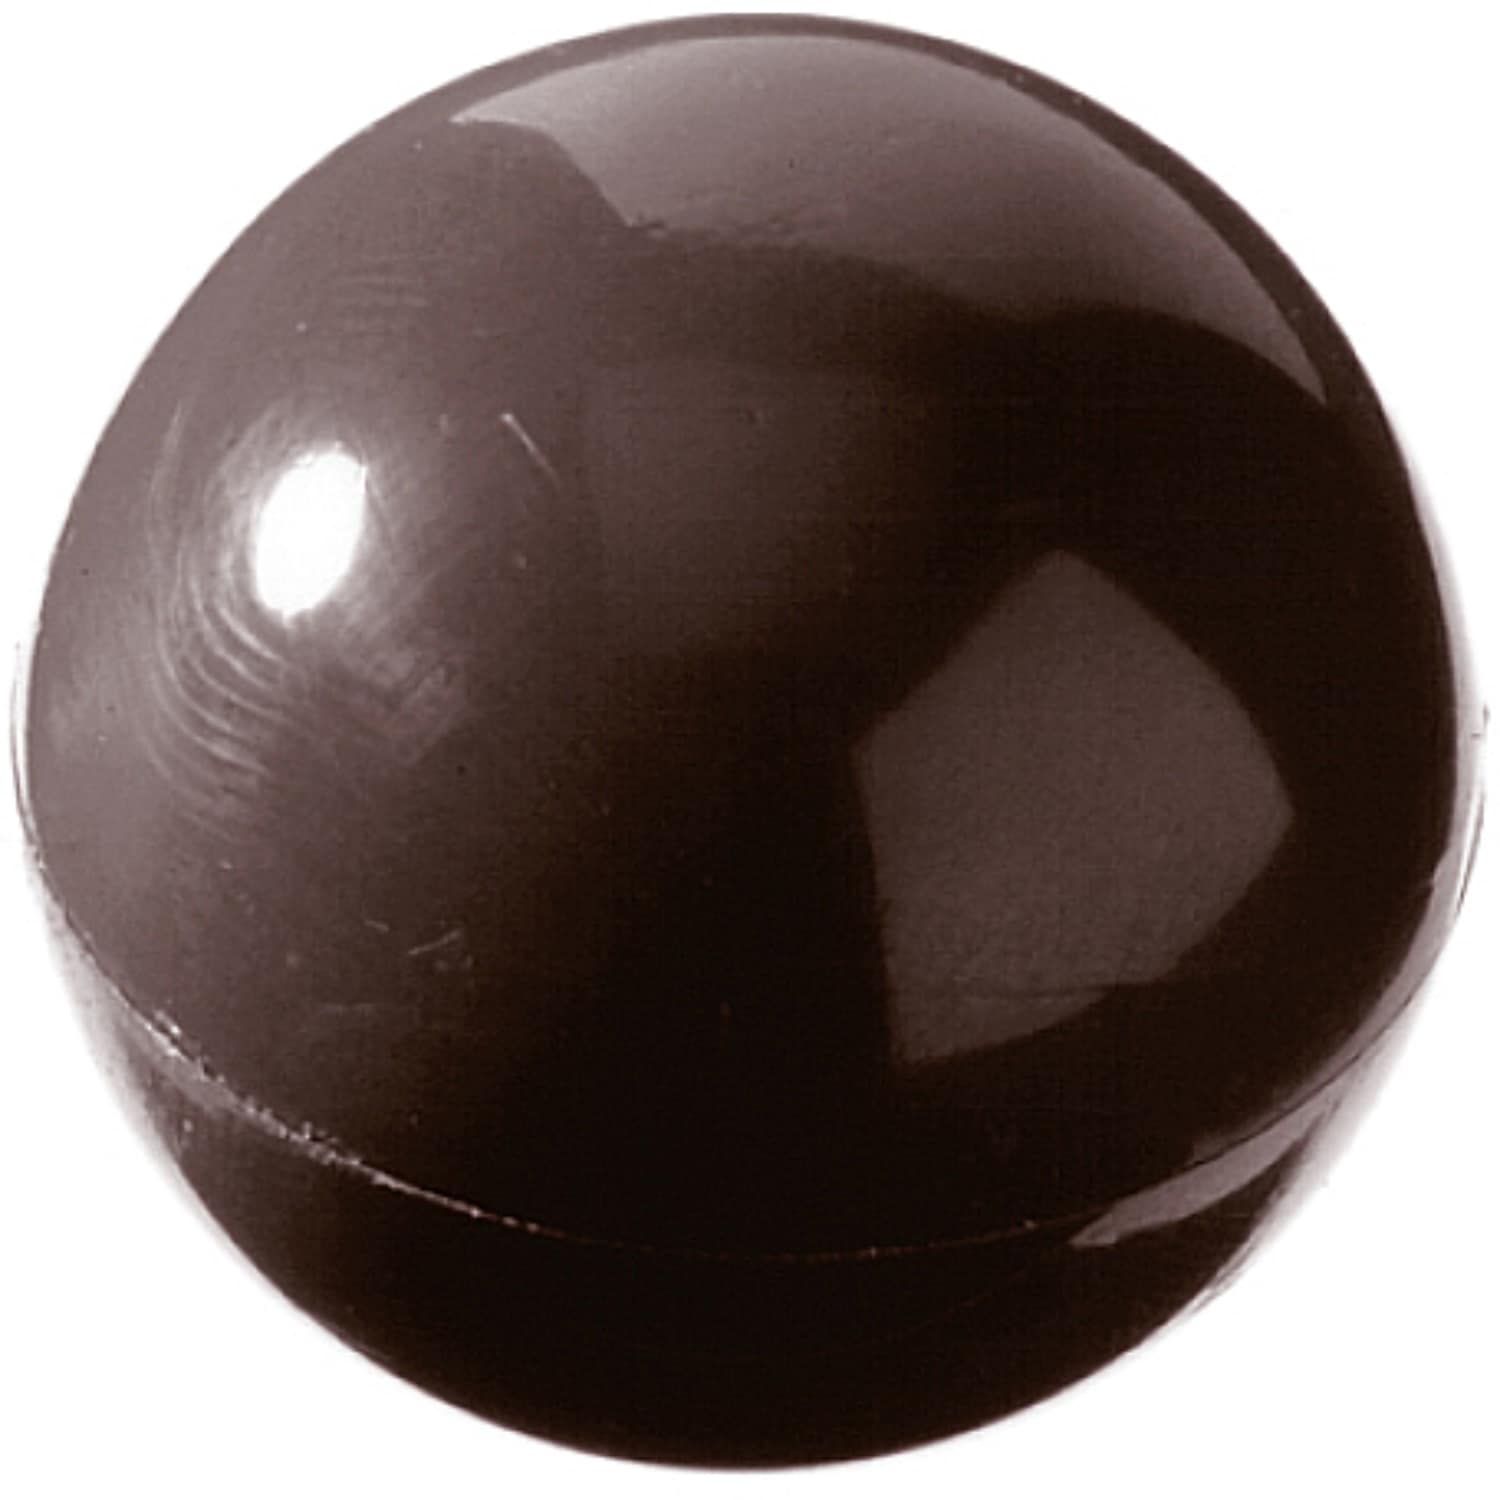 Chocolate mould "Sphere" 421495